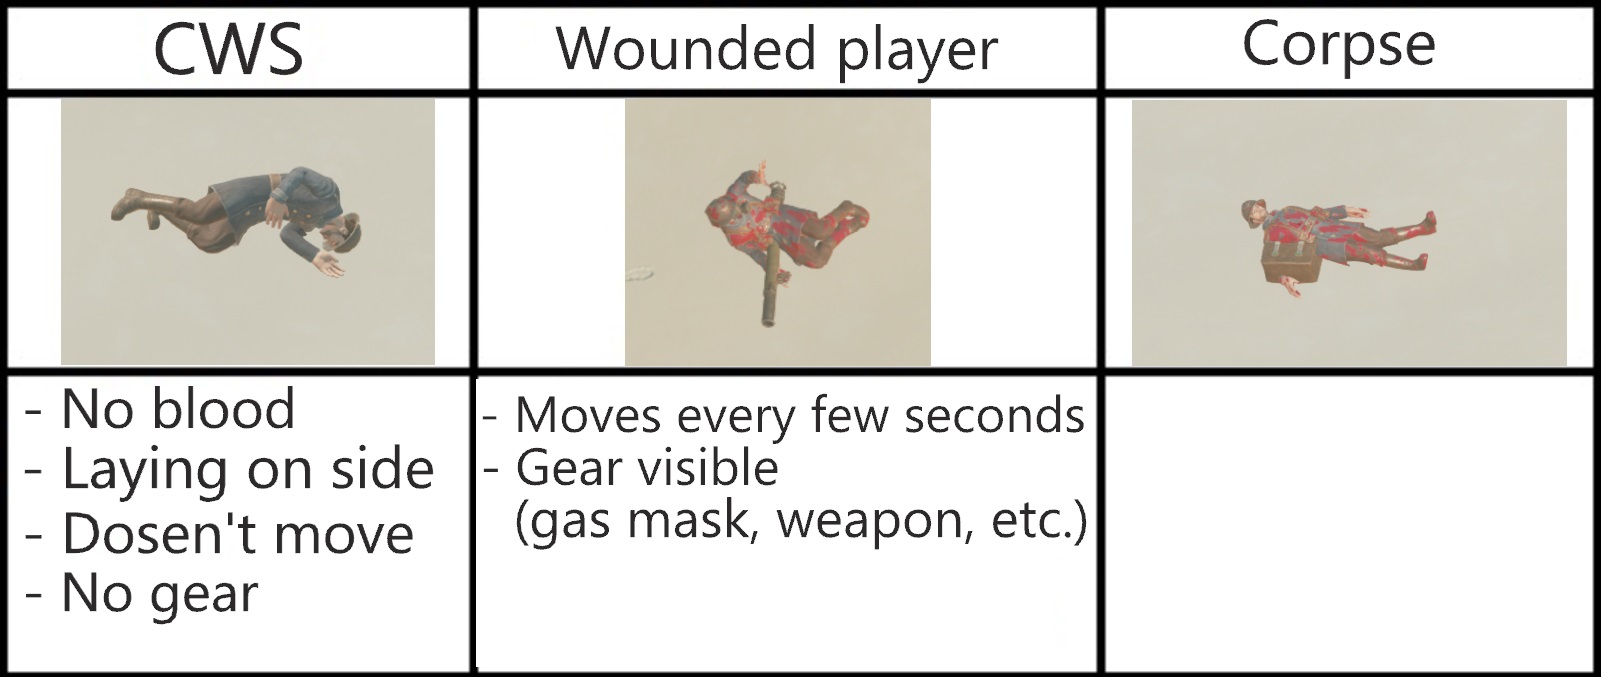 Wounded Player compared to Criticially Wounded Soldier and corpse.